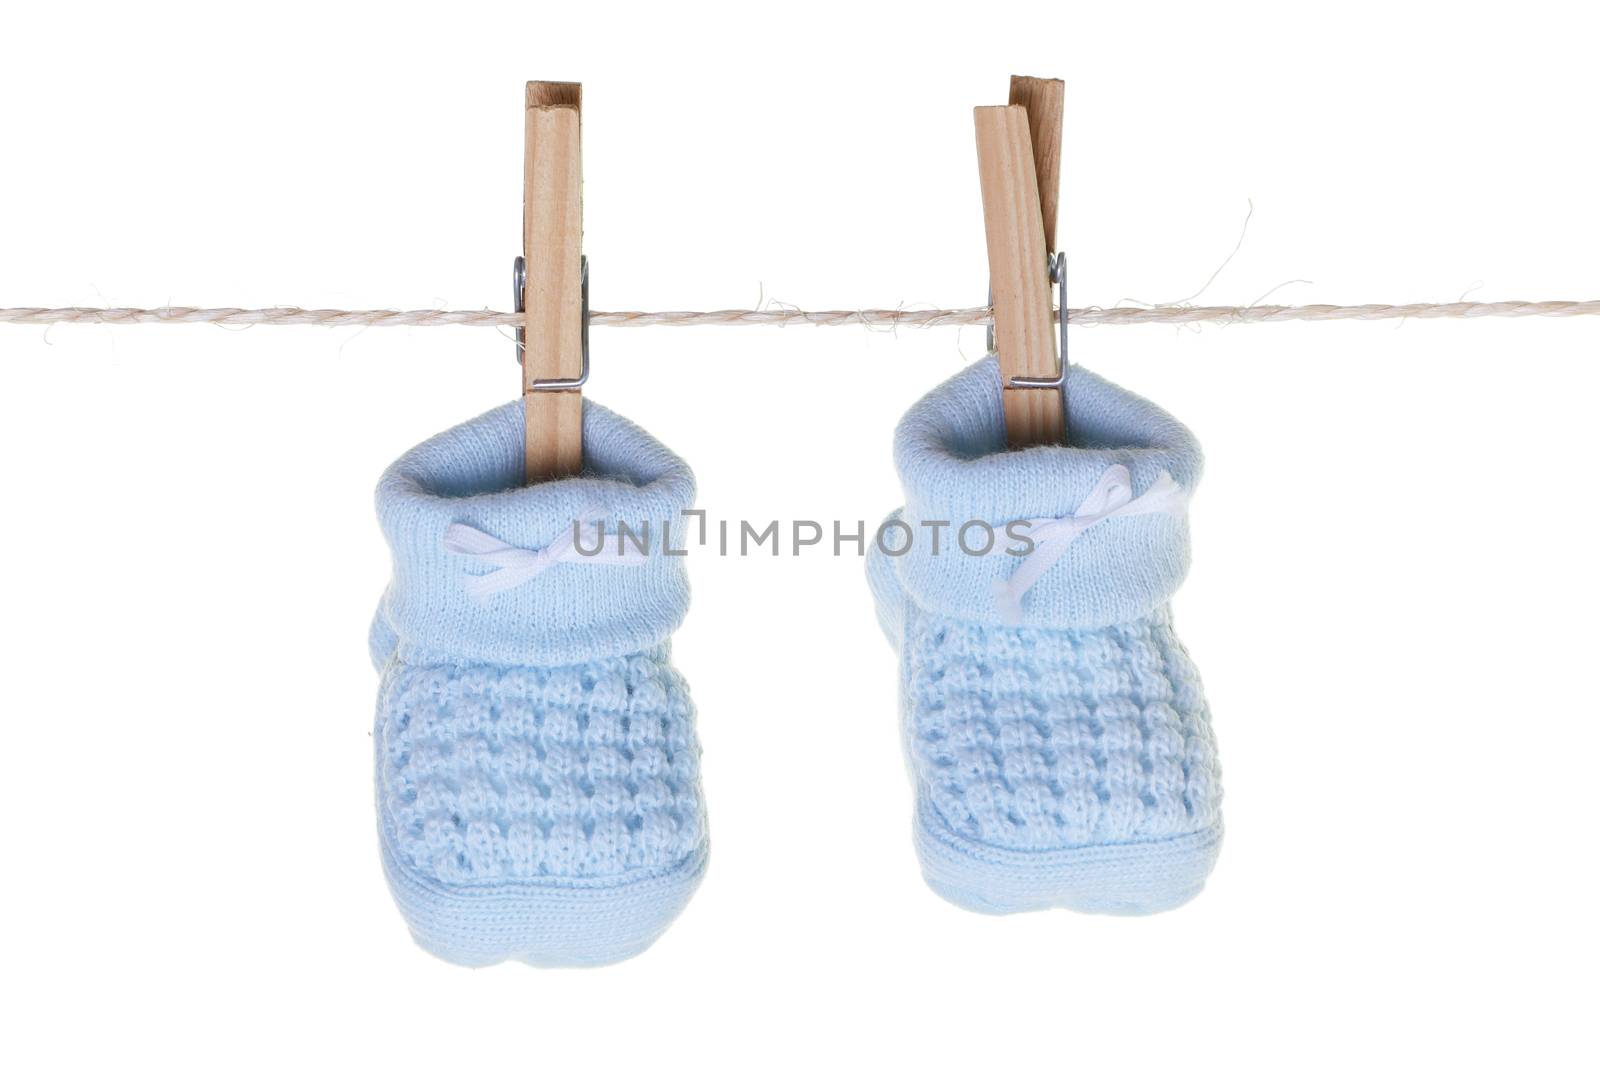 A pair of blue baby booties hanging from washing line with wooden pegs